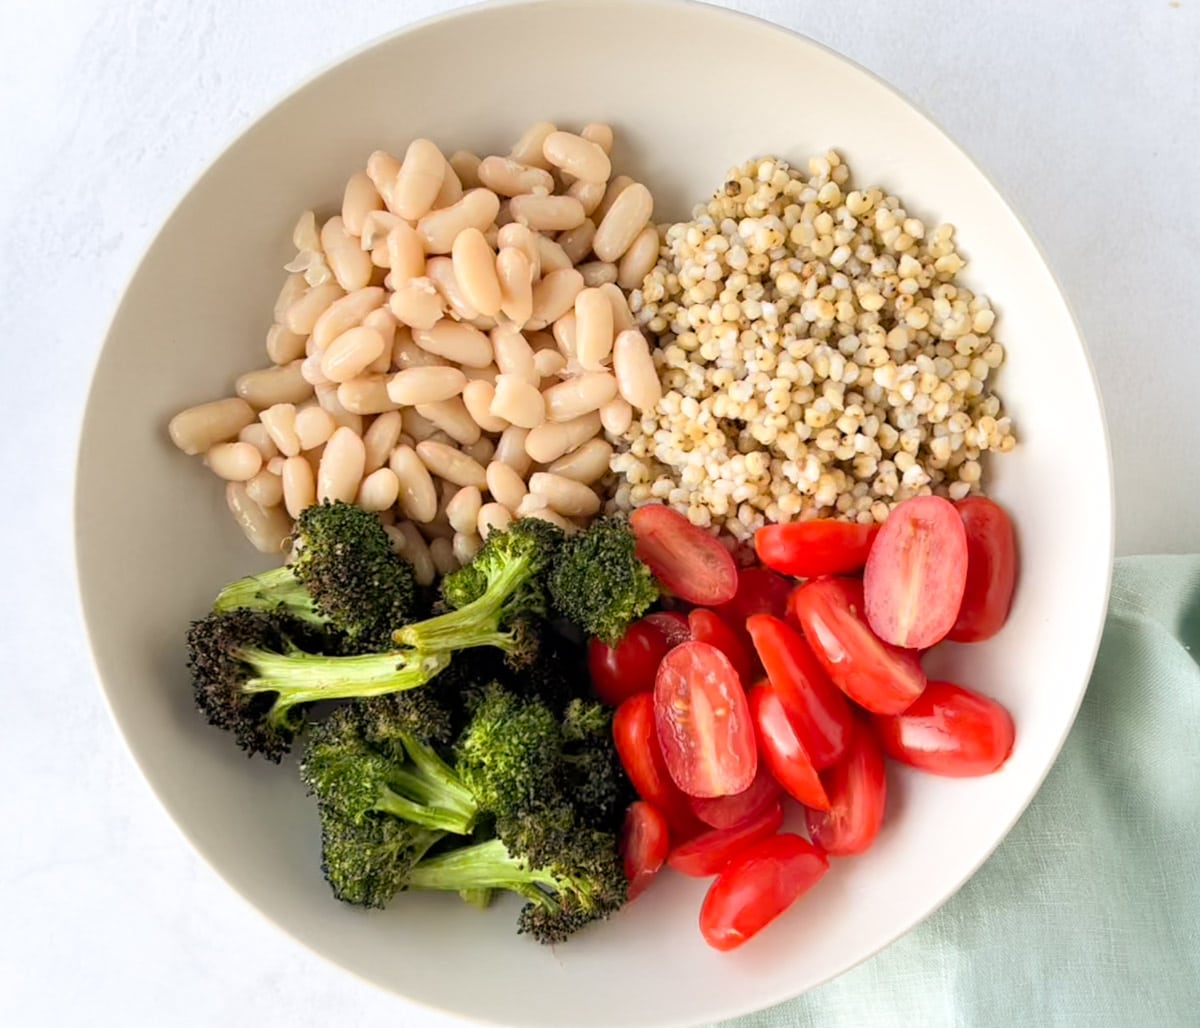 Sorghum (jowar), beans, broccoli and tomatoes in a bowl